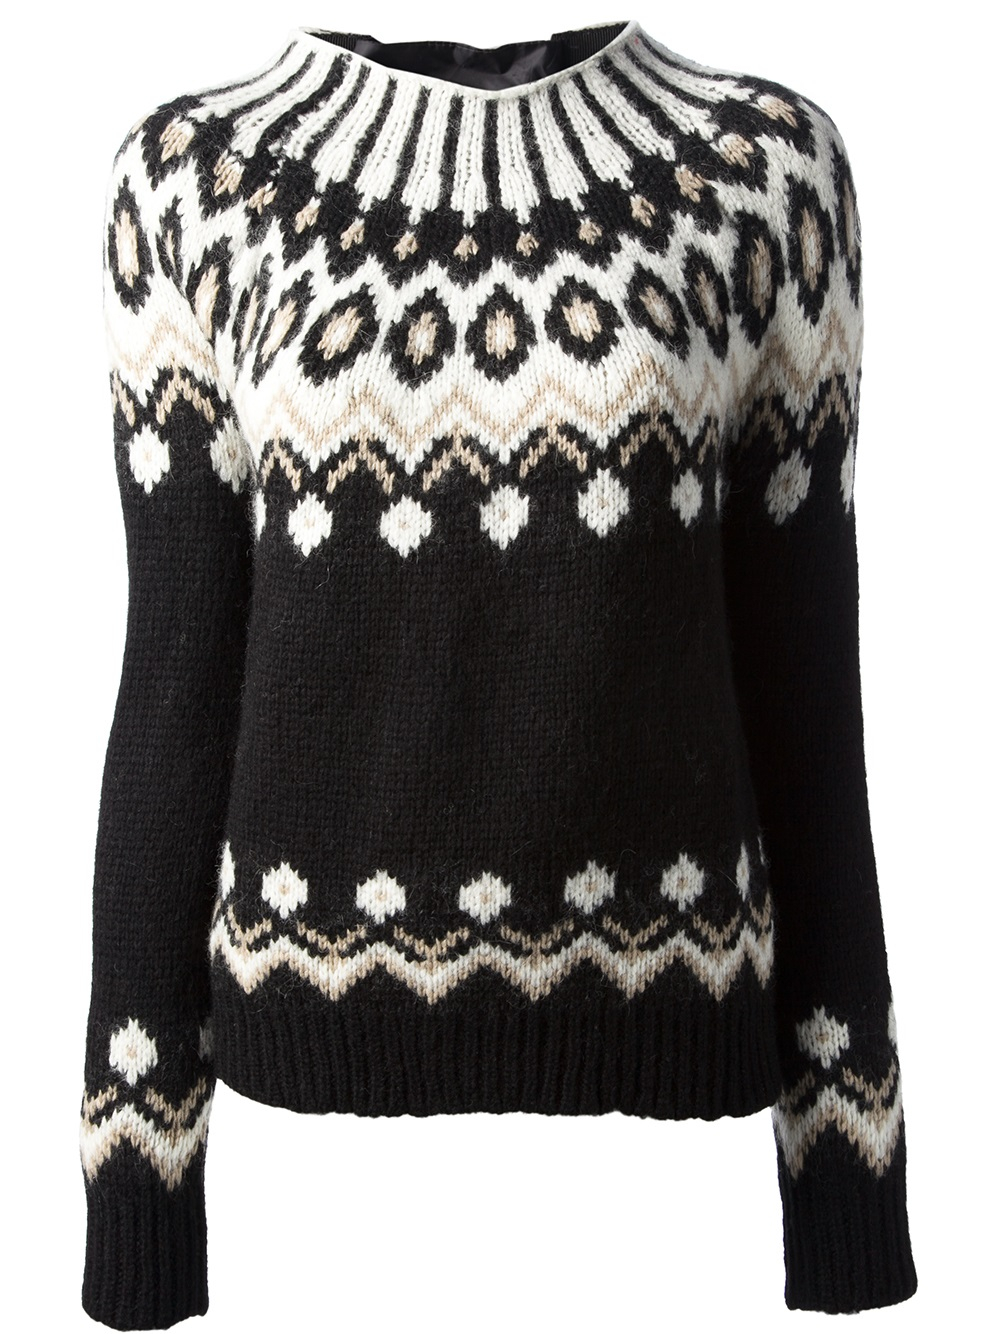 Moncler Fair Isle Knit Sweater in Black 